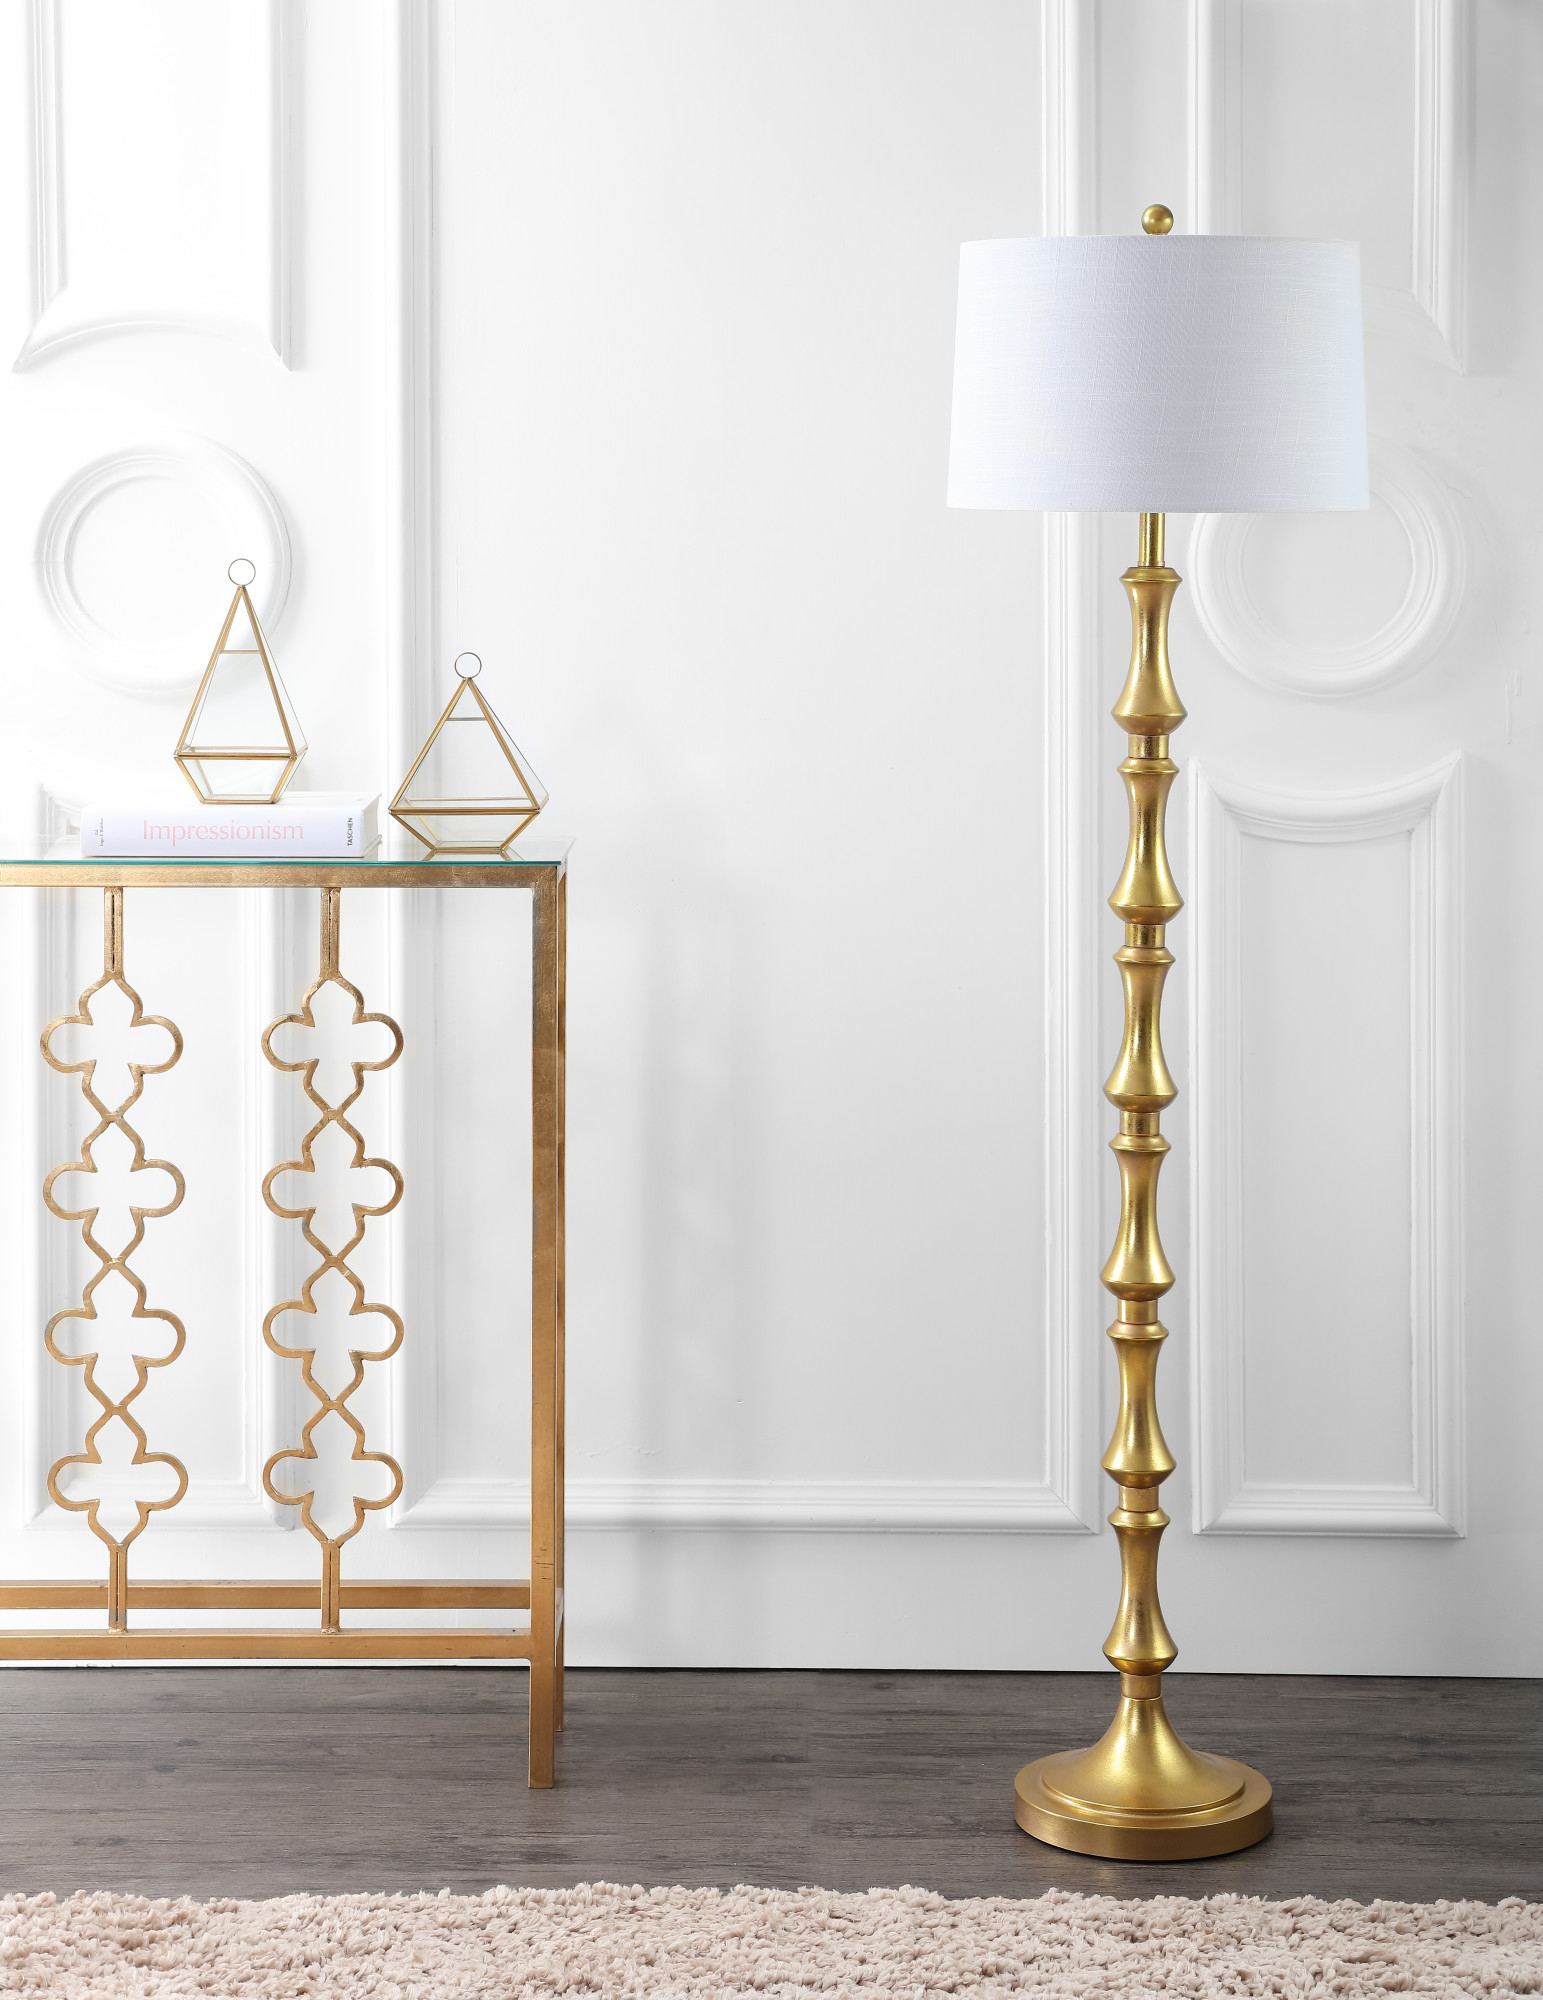 Details About Jonathan Y Lighting Jyl4031 Jaxon Single Light 63 Tall Led Buffet Floor Lamp pertaining to sizing 1543 X 2000